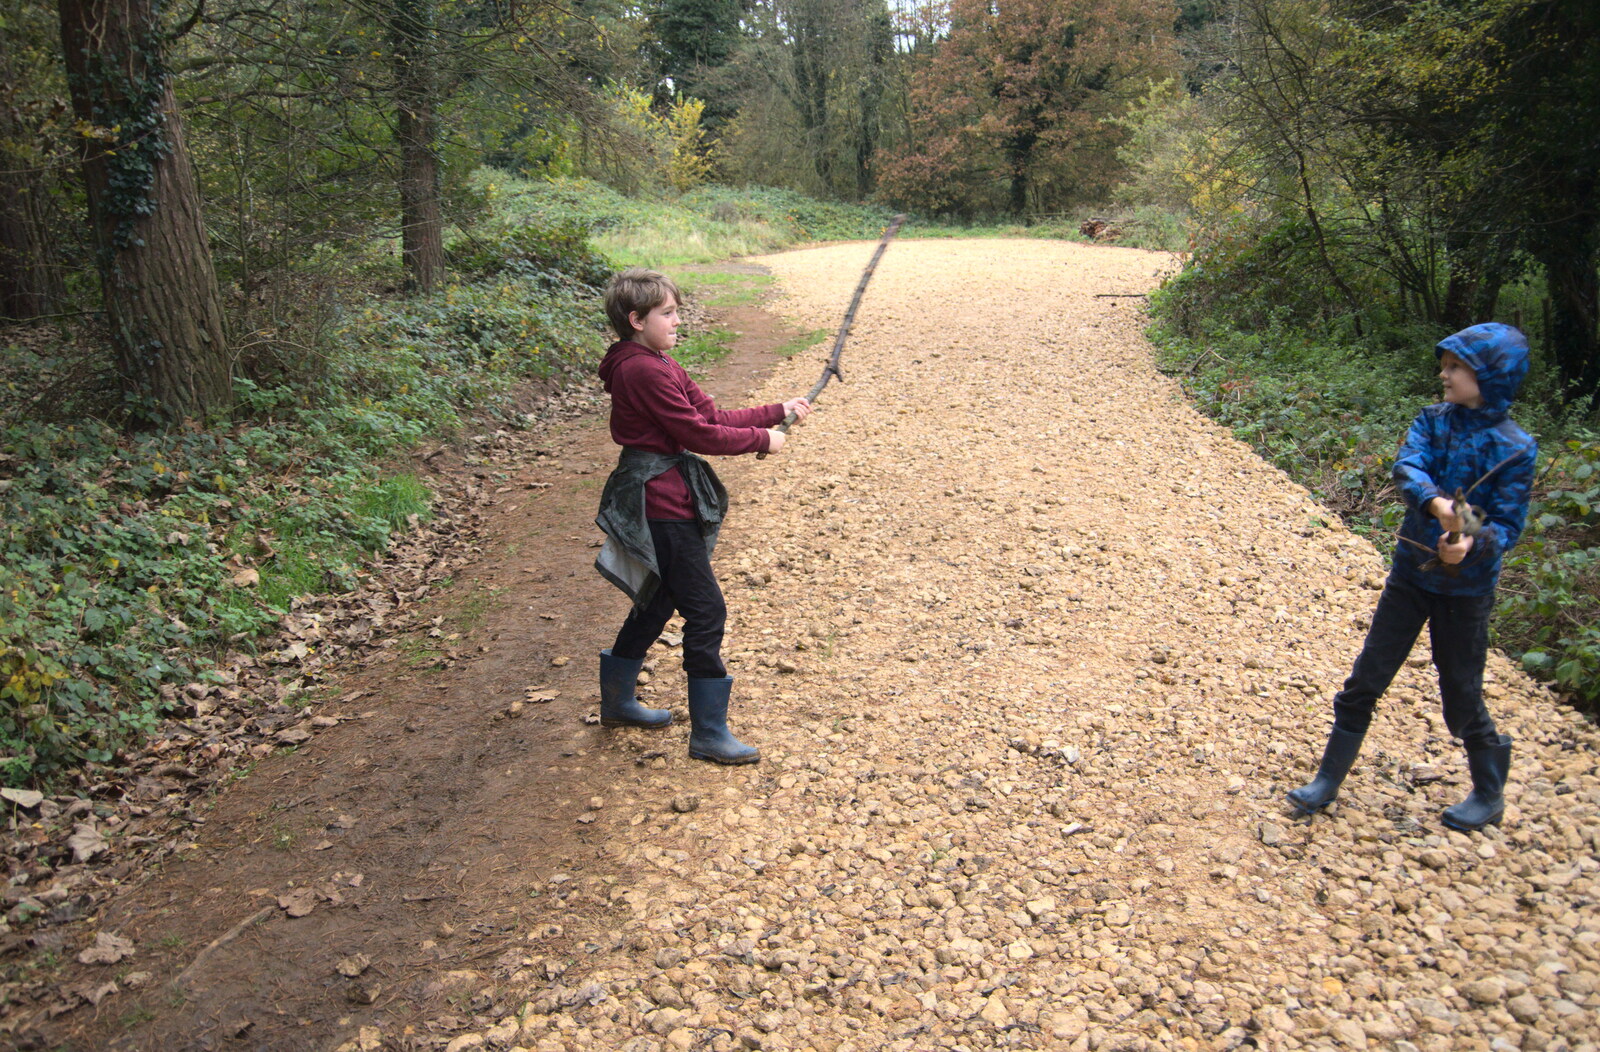 Fred and Harry sword-fight with sticks from A Trip to Lynford Arboretum, Mundford, Norfolk - 30th October 2020